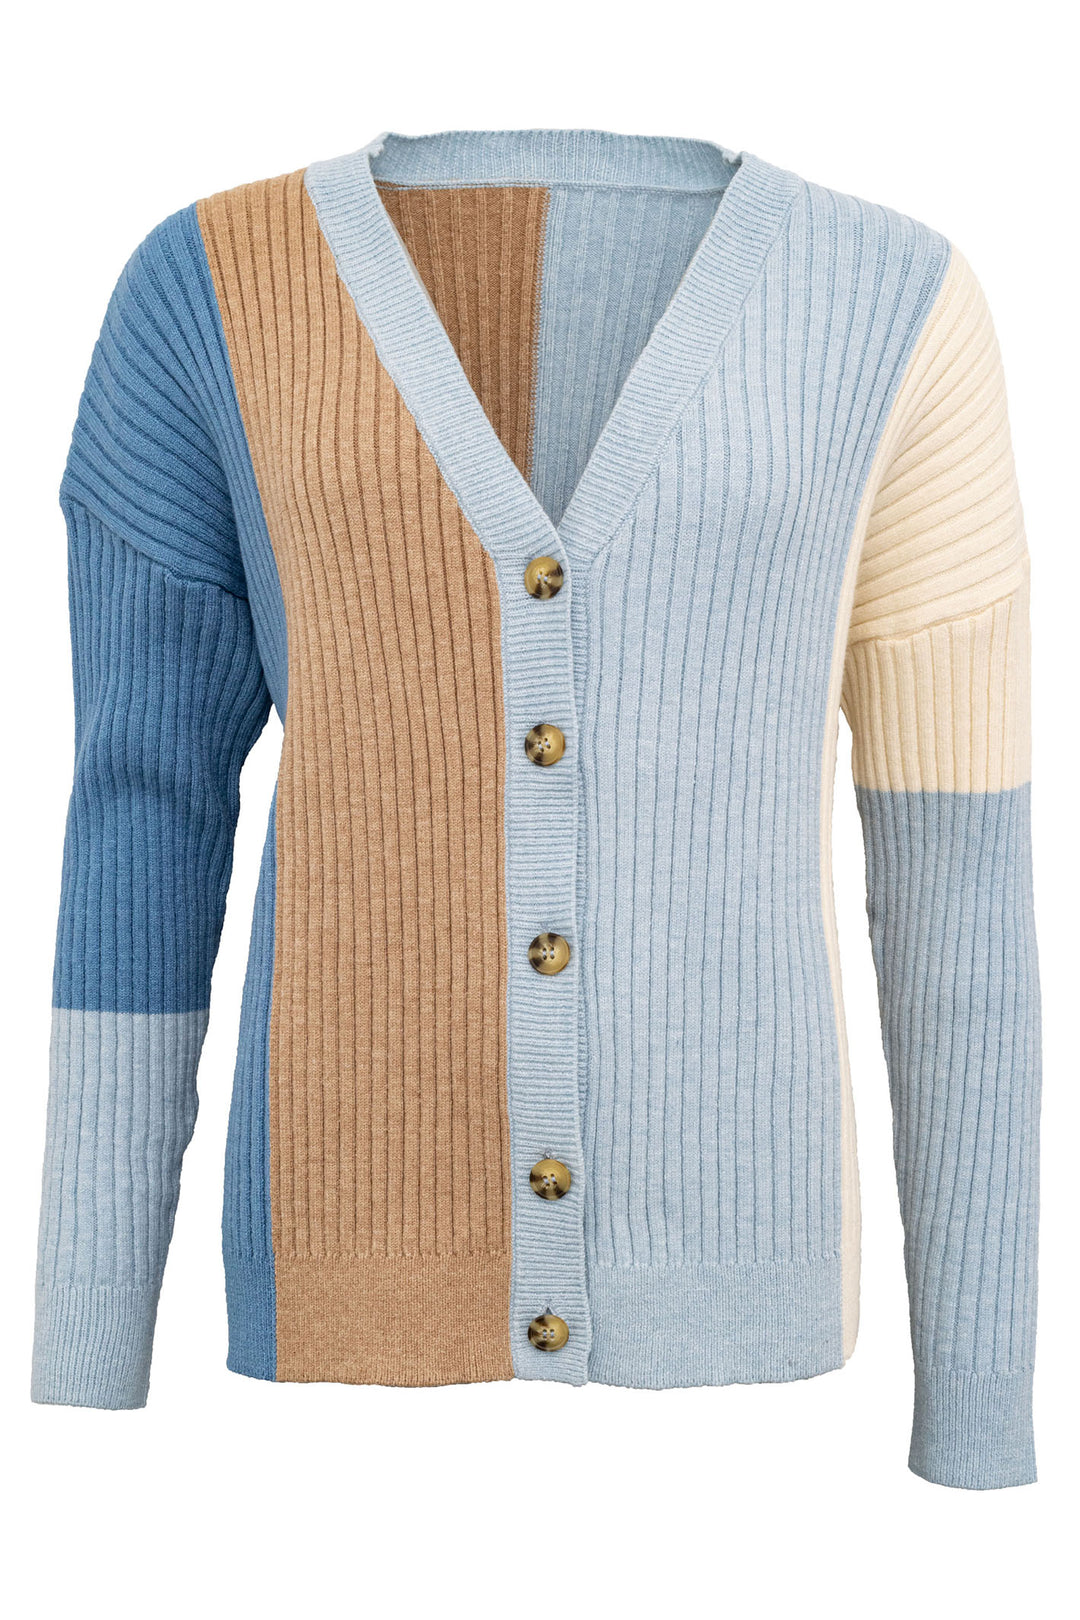 Costa Mani 2401612 Blue Combi Uncle Knitted Cardigan - Experience Boutique